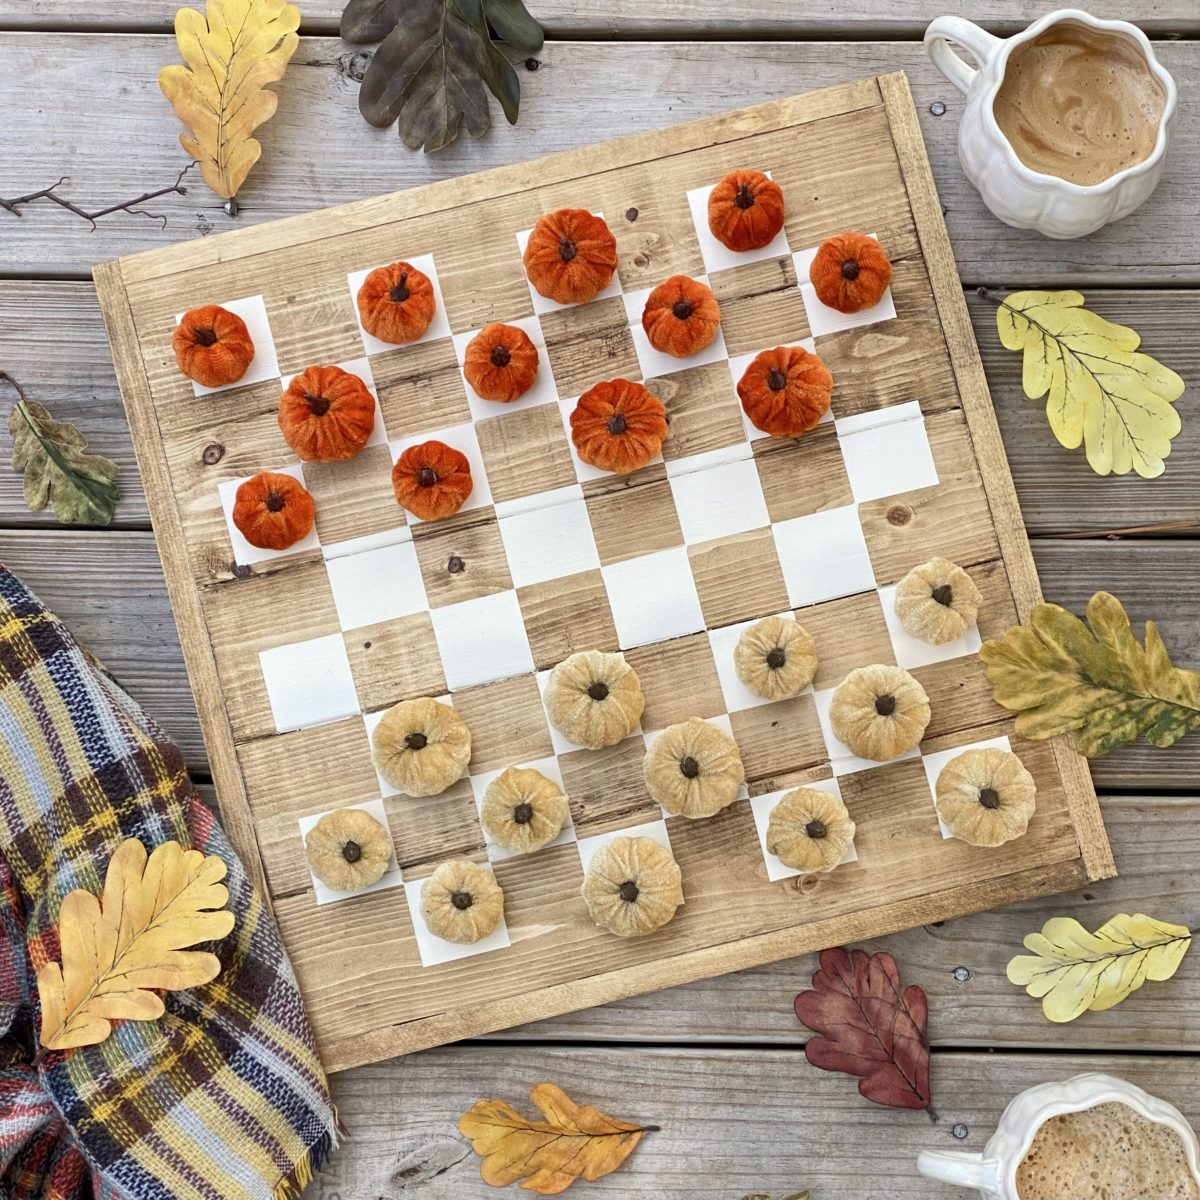 DIY Checkerboard all set to play with in fall with little orange and gold pumpkins as checker pieces.